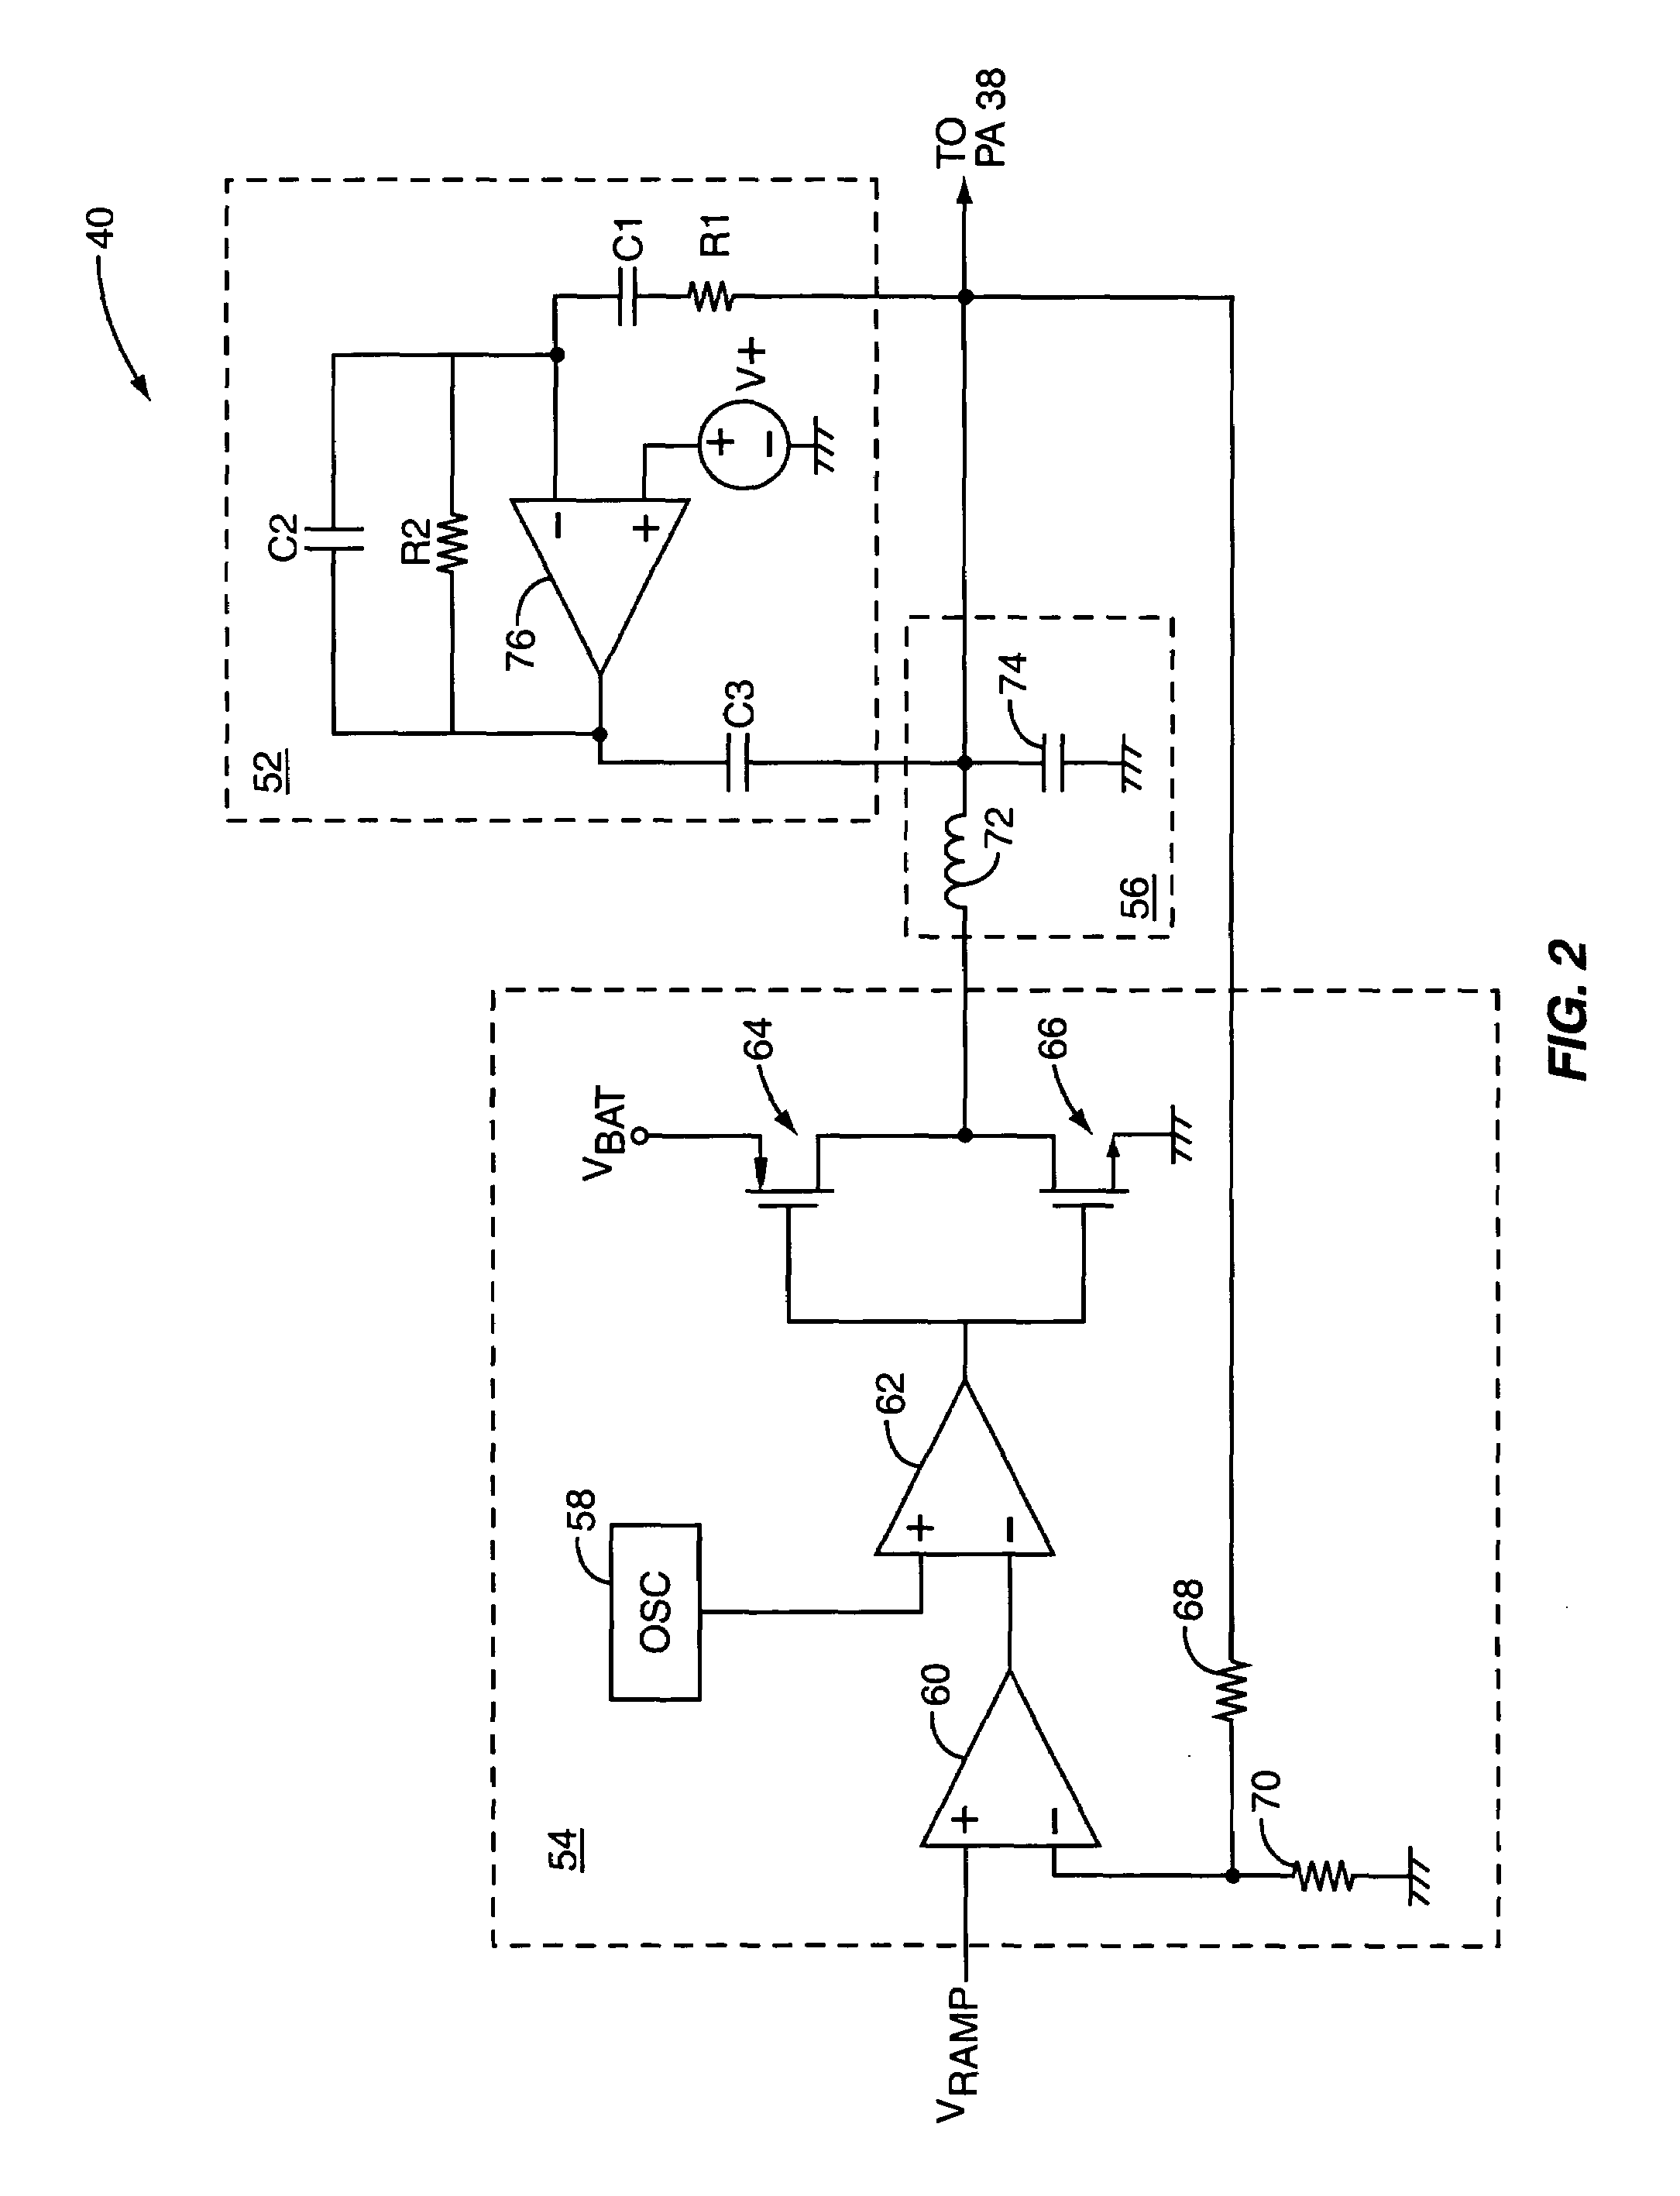 Active ripple reduction switched mode power supplies